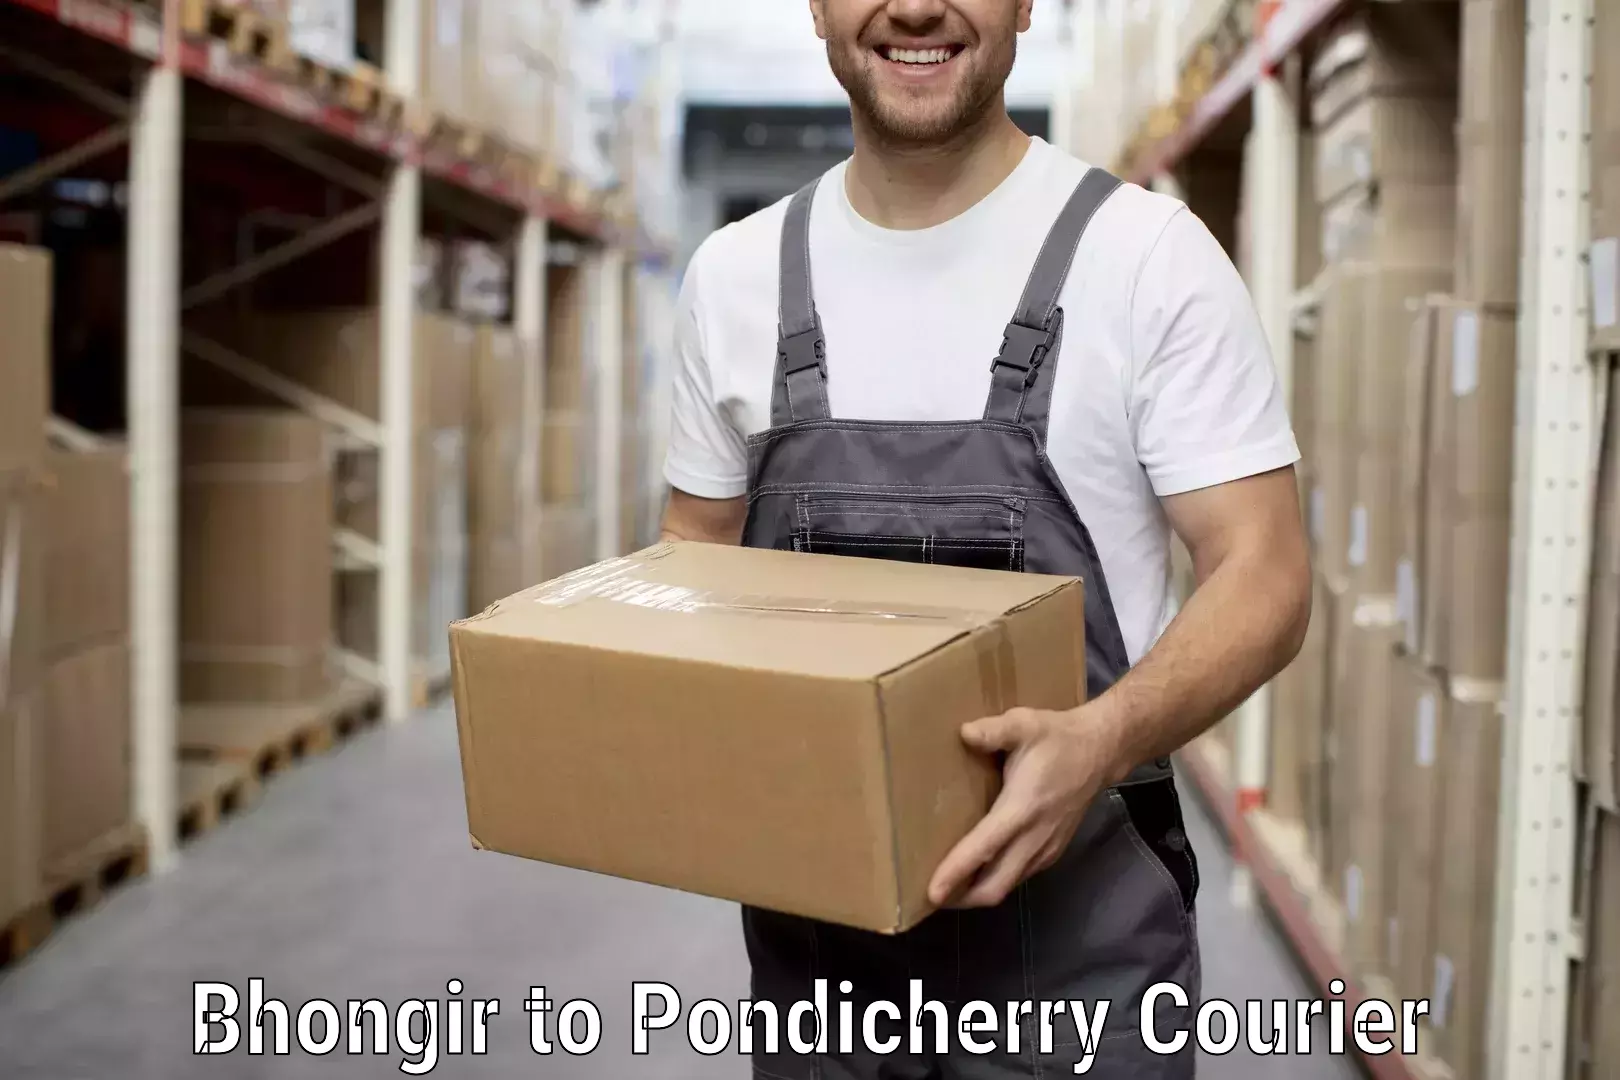 Trusted relocation experts Bhongir to Pondicherry